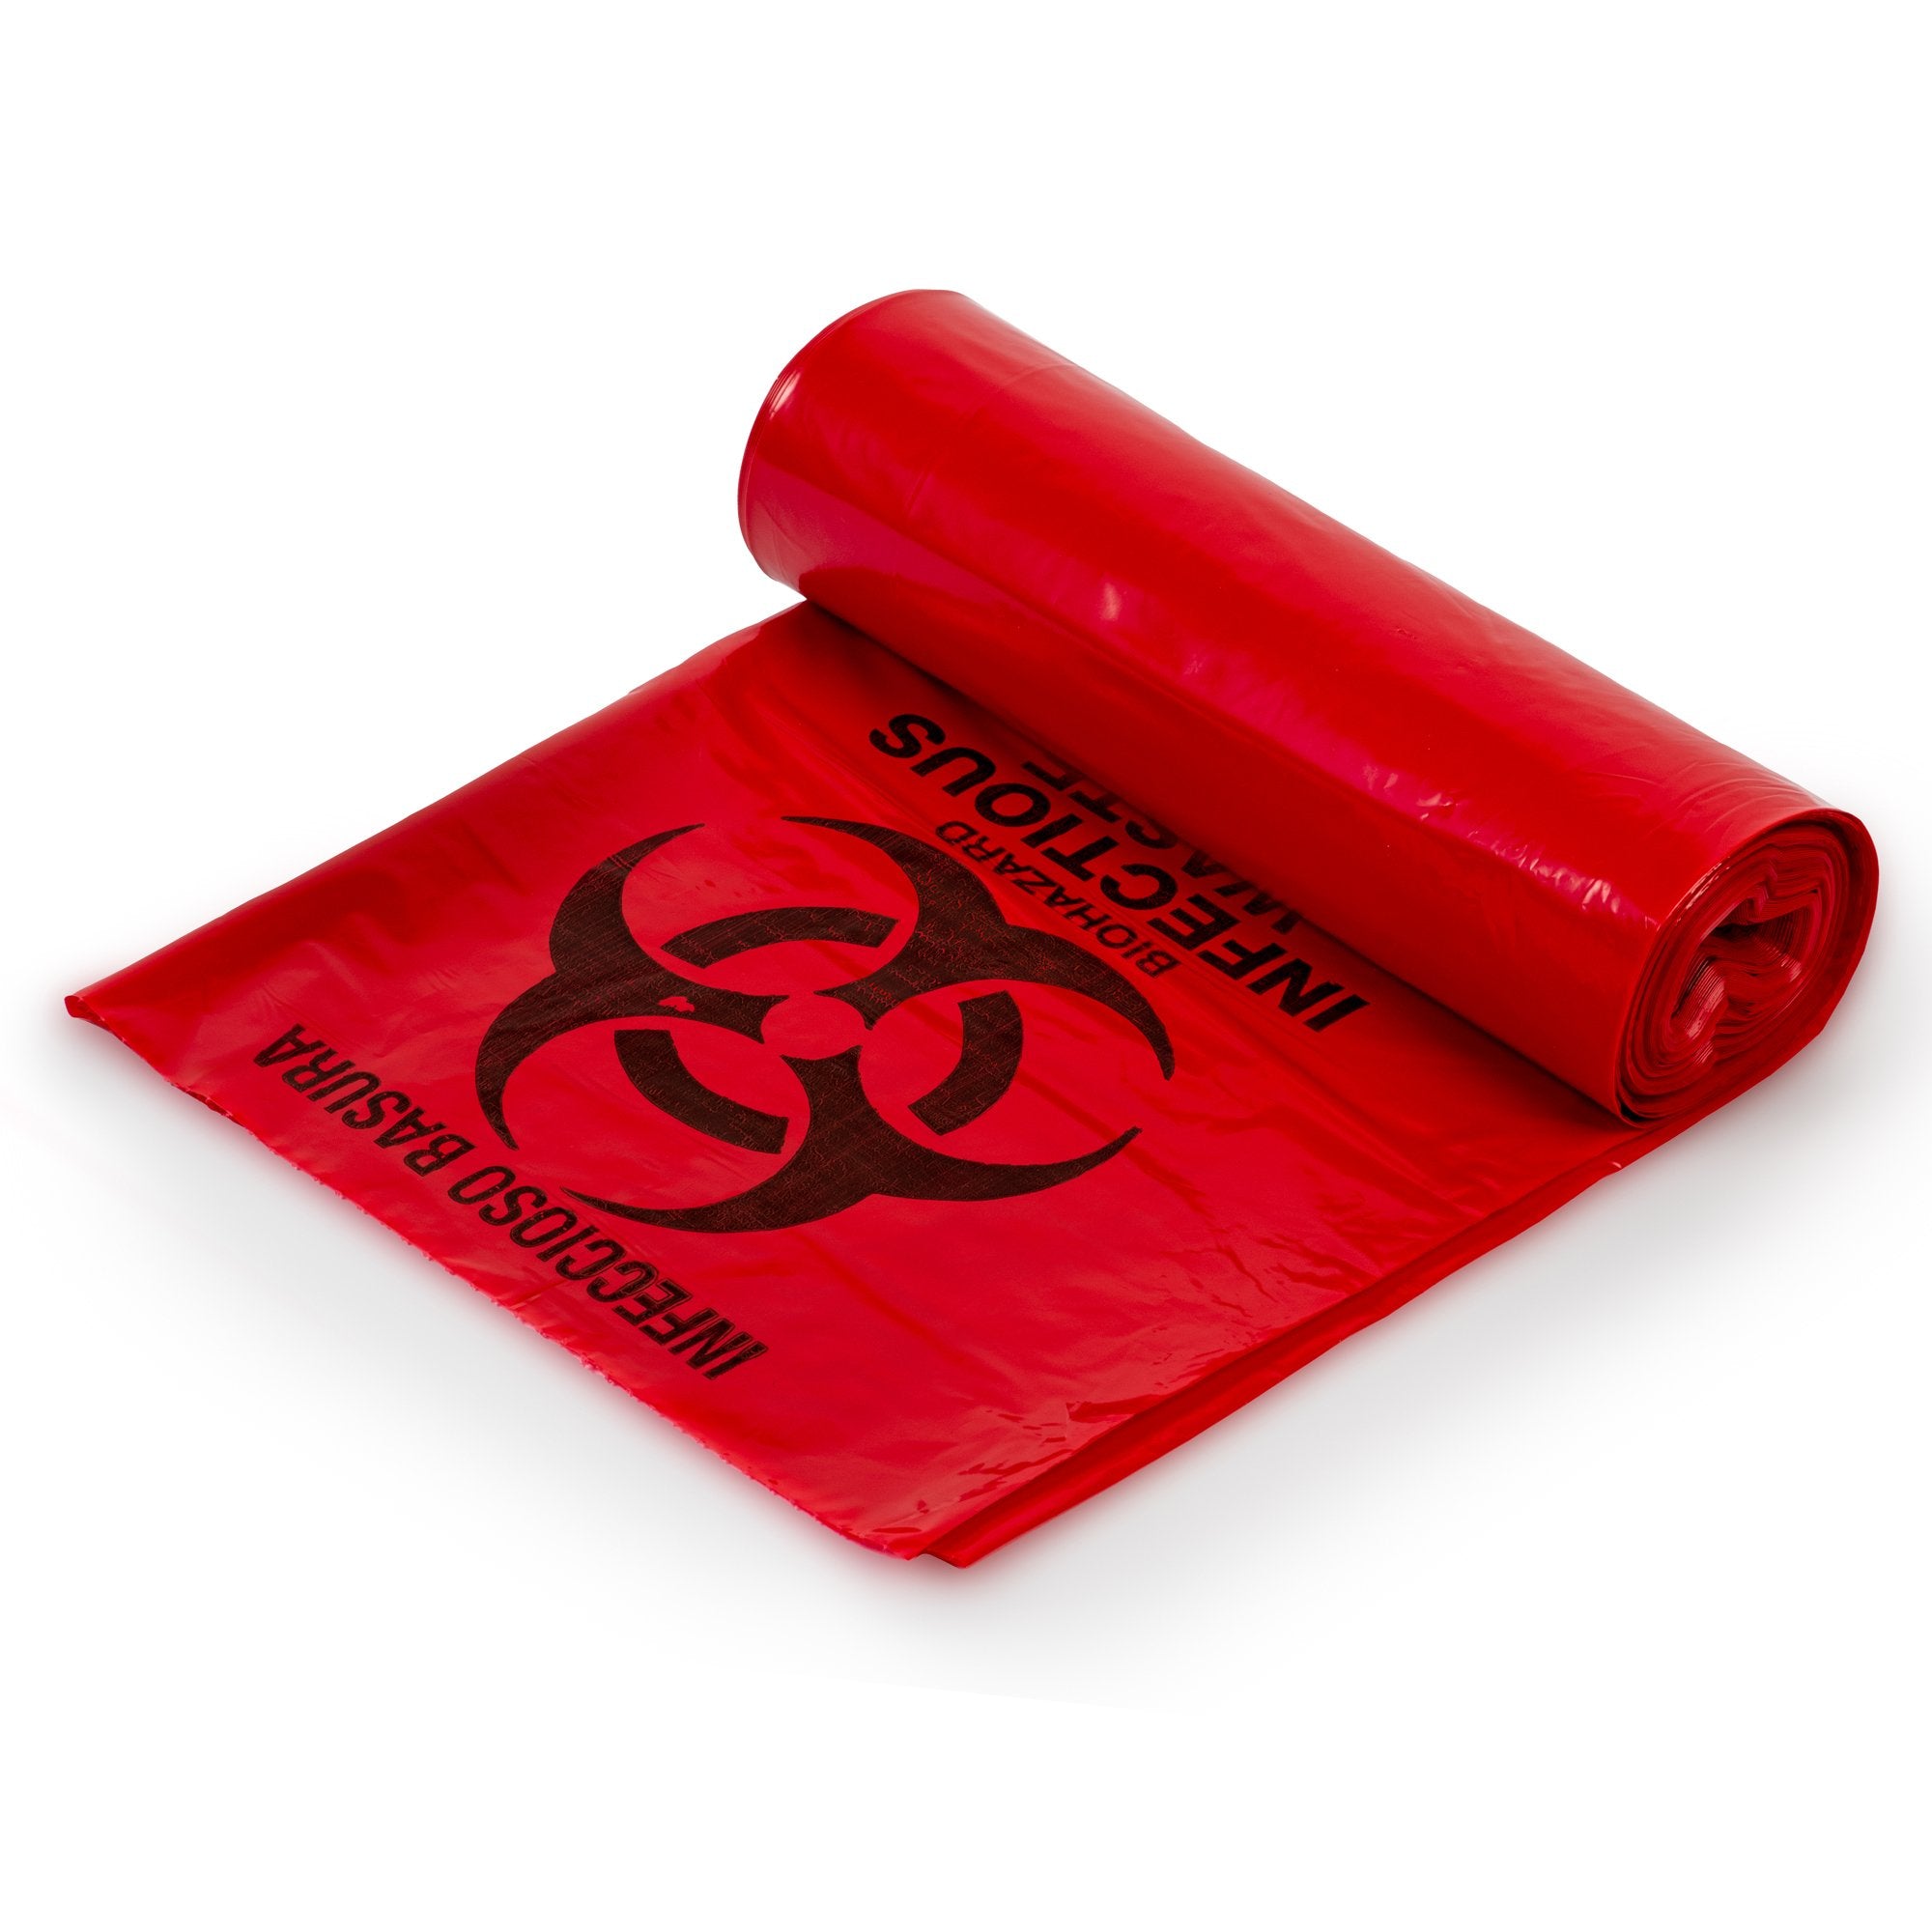 Infectious Waste Bag Colonial Bag 10 gal. Red Bag LLDPE 24 X 24 Inch